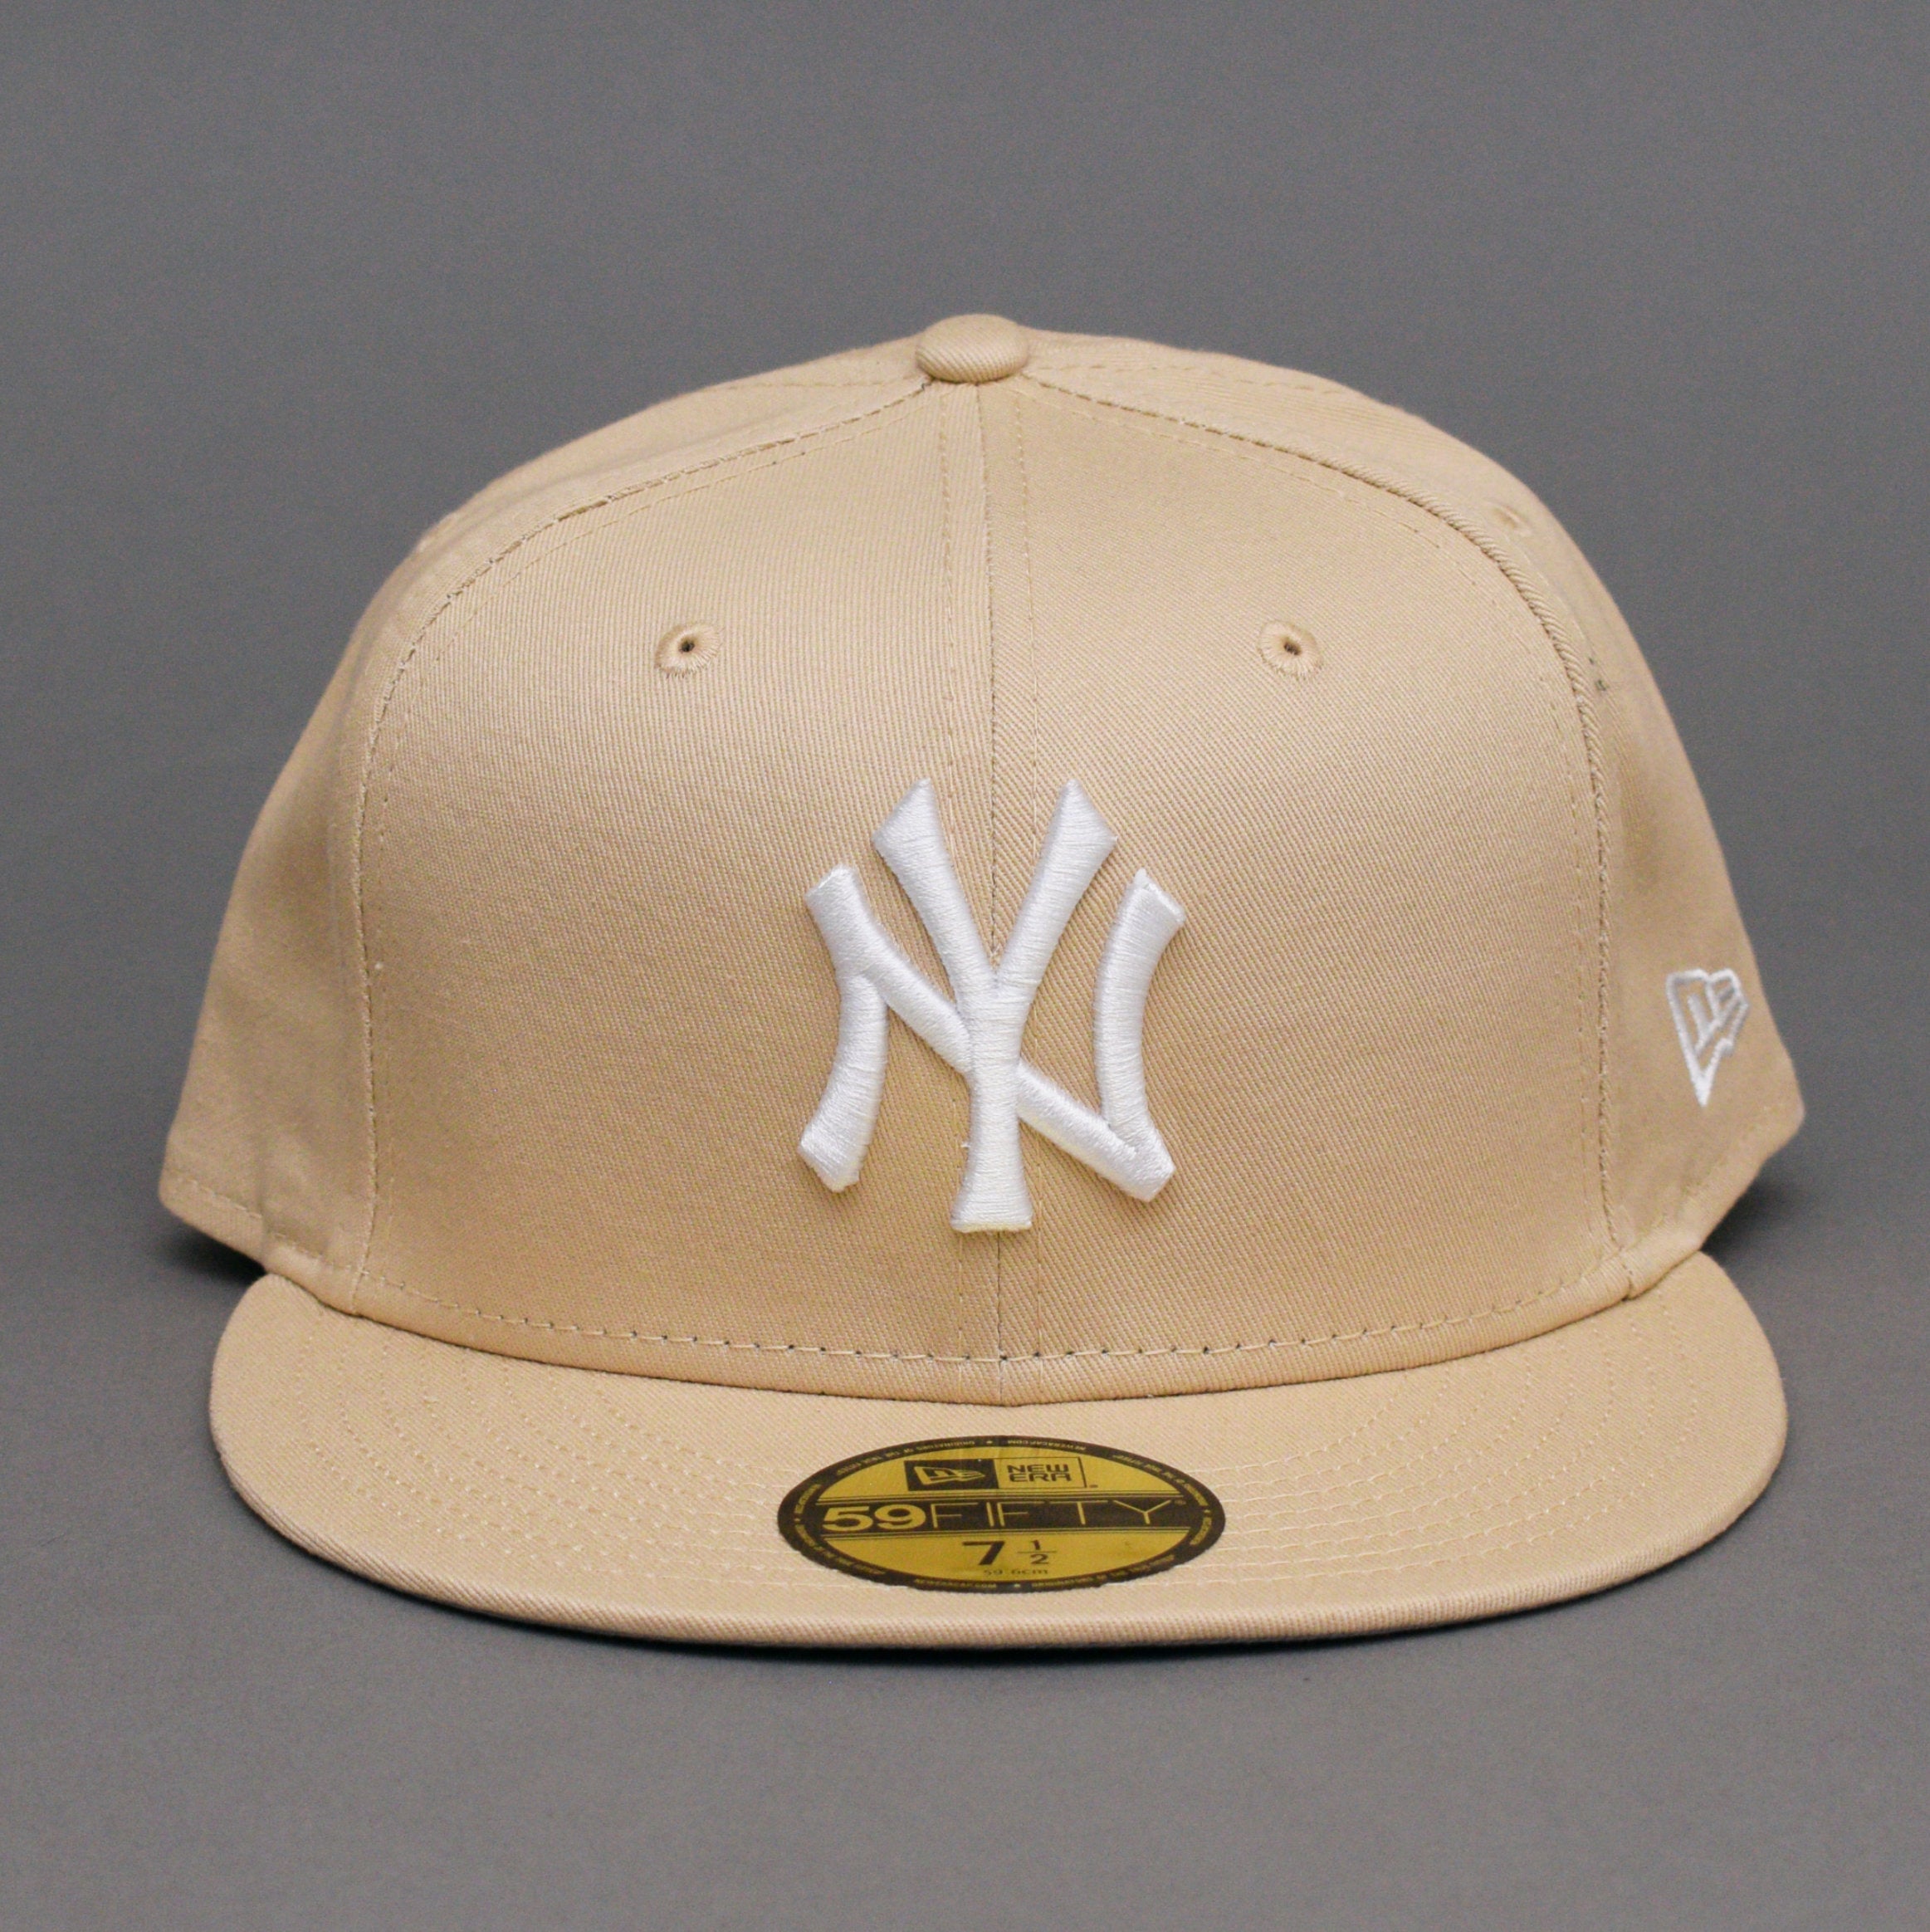 New Era - NY Yankees 59Fifty Essential - Fitted - Cream Stone/White 60298738 